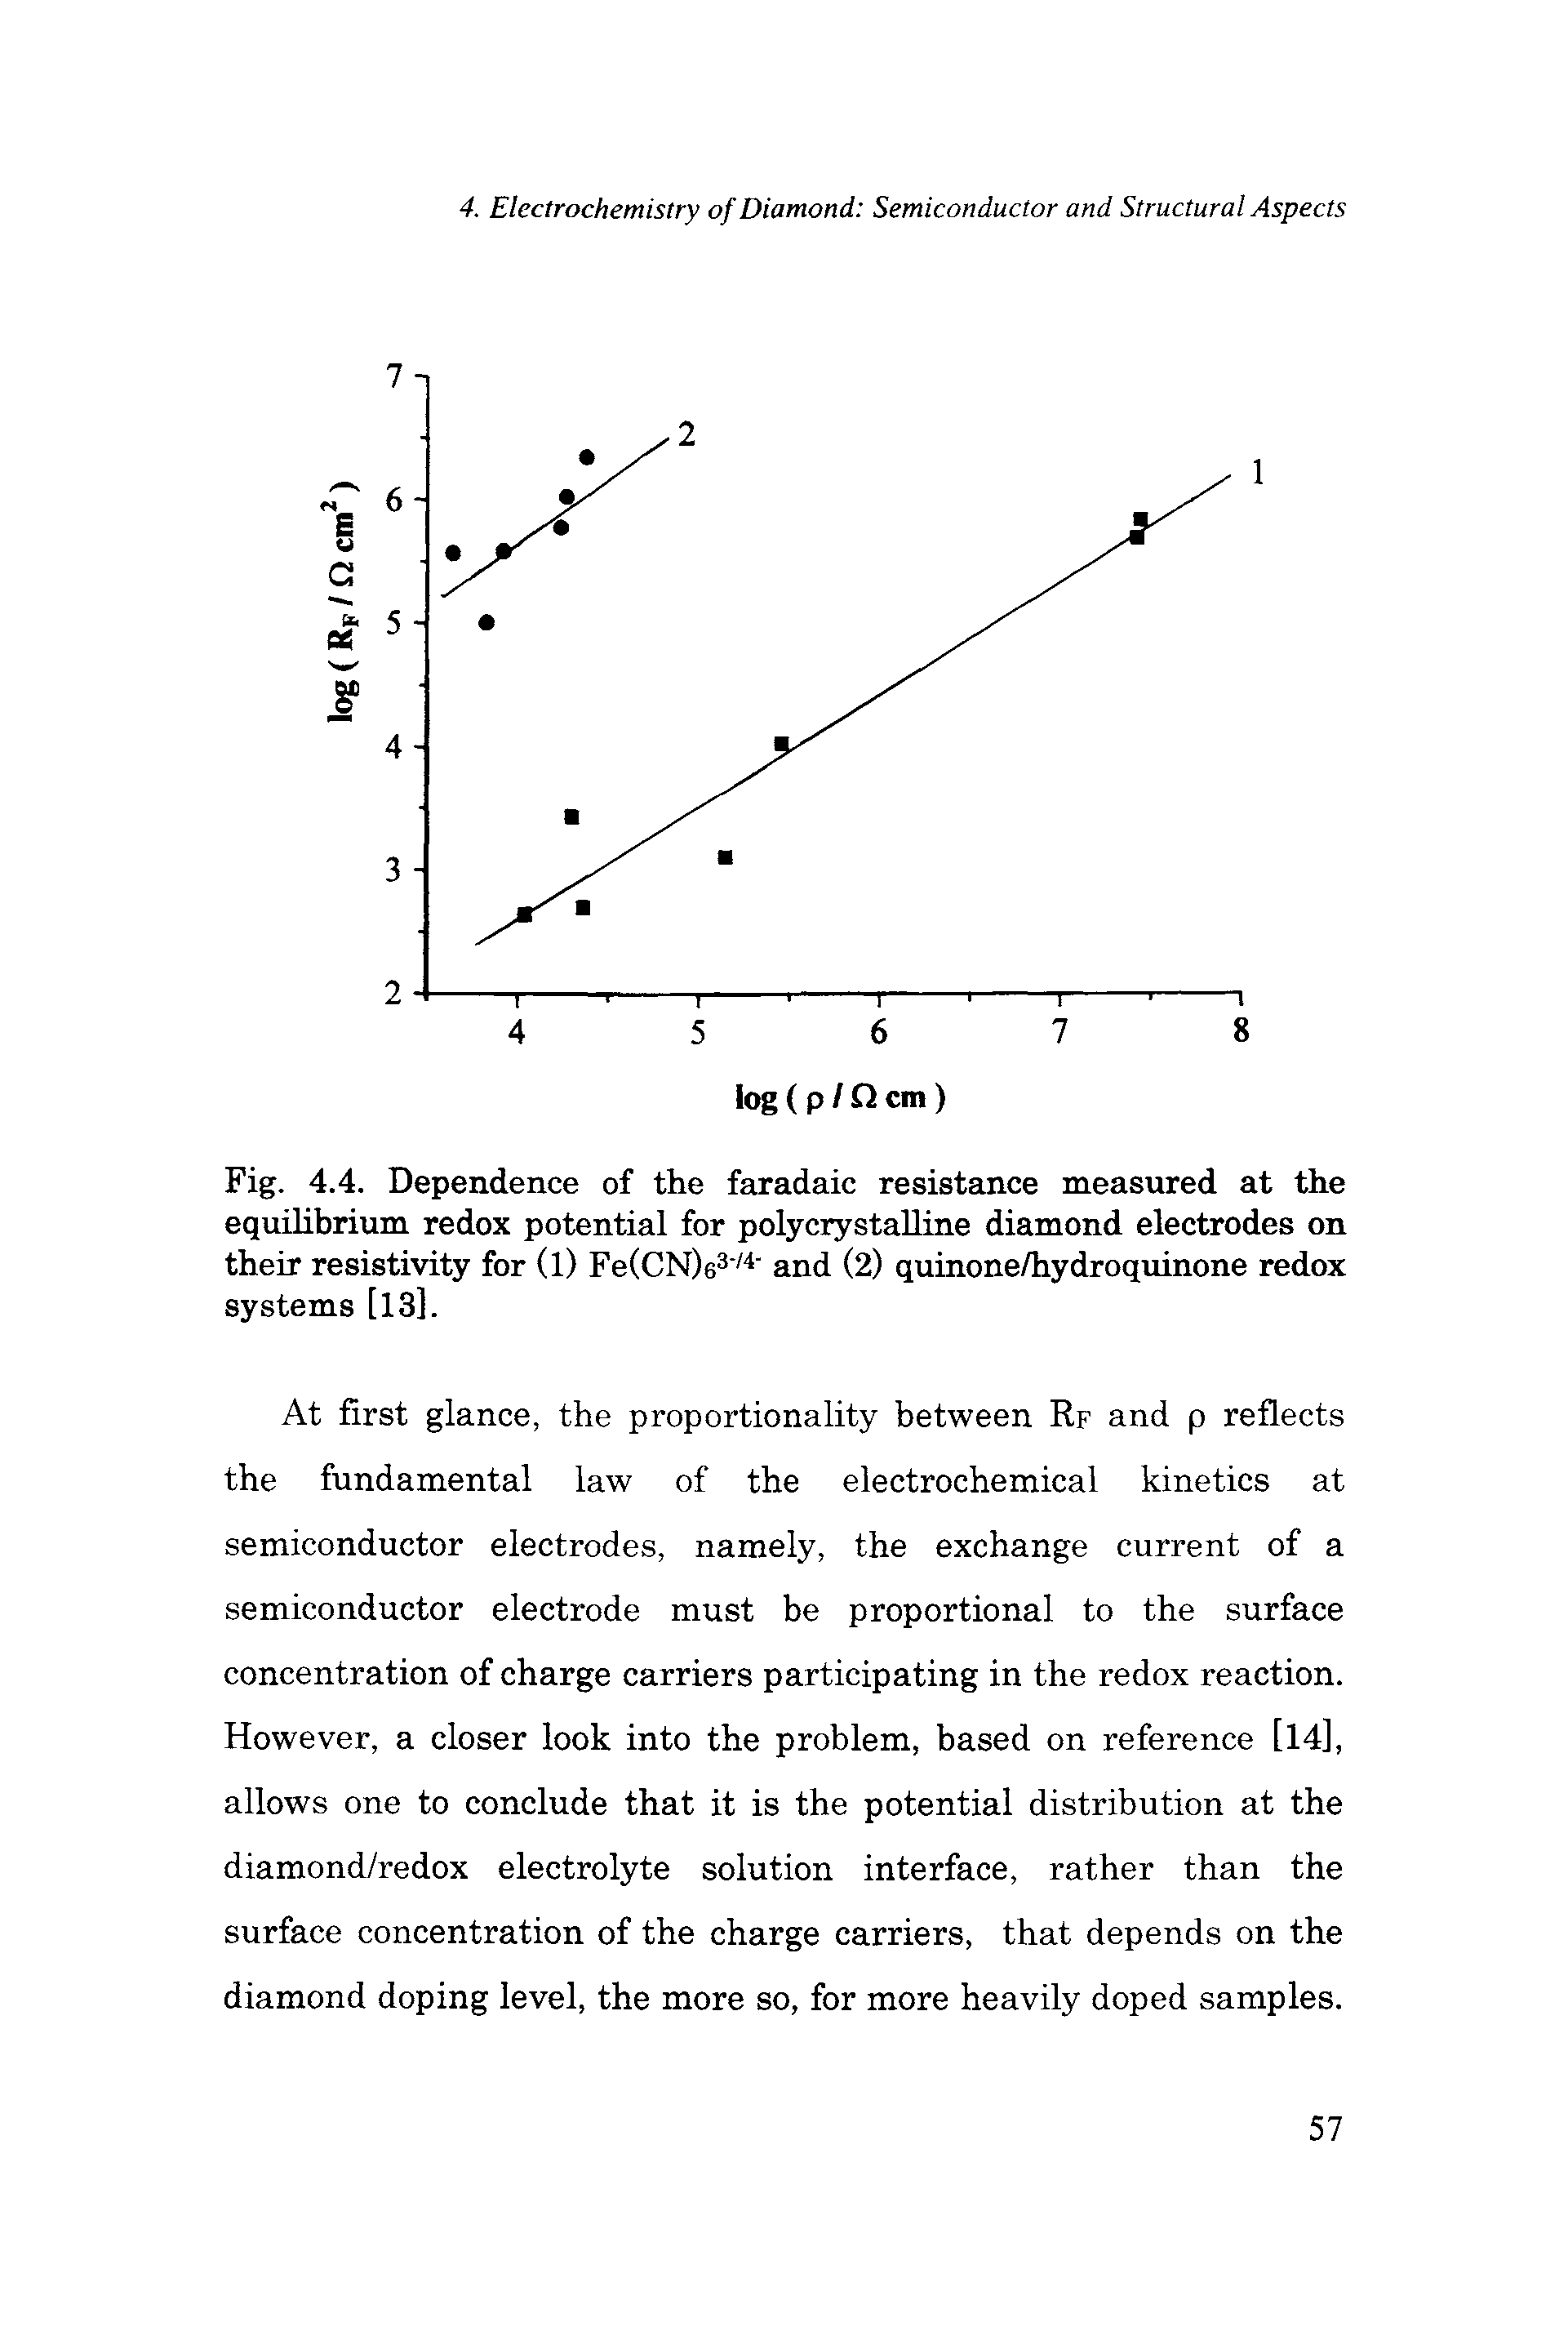 Fig. 4.4. Dependence of the faradaic resistance measured at the equilibrium redox potential for polycrystaUine diamond electrodes on their resistivity for (1) Fe(CN)63 / and (2) quinone/hydroquinone redox systems [13].